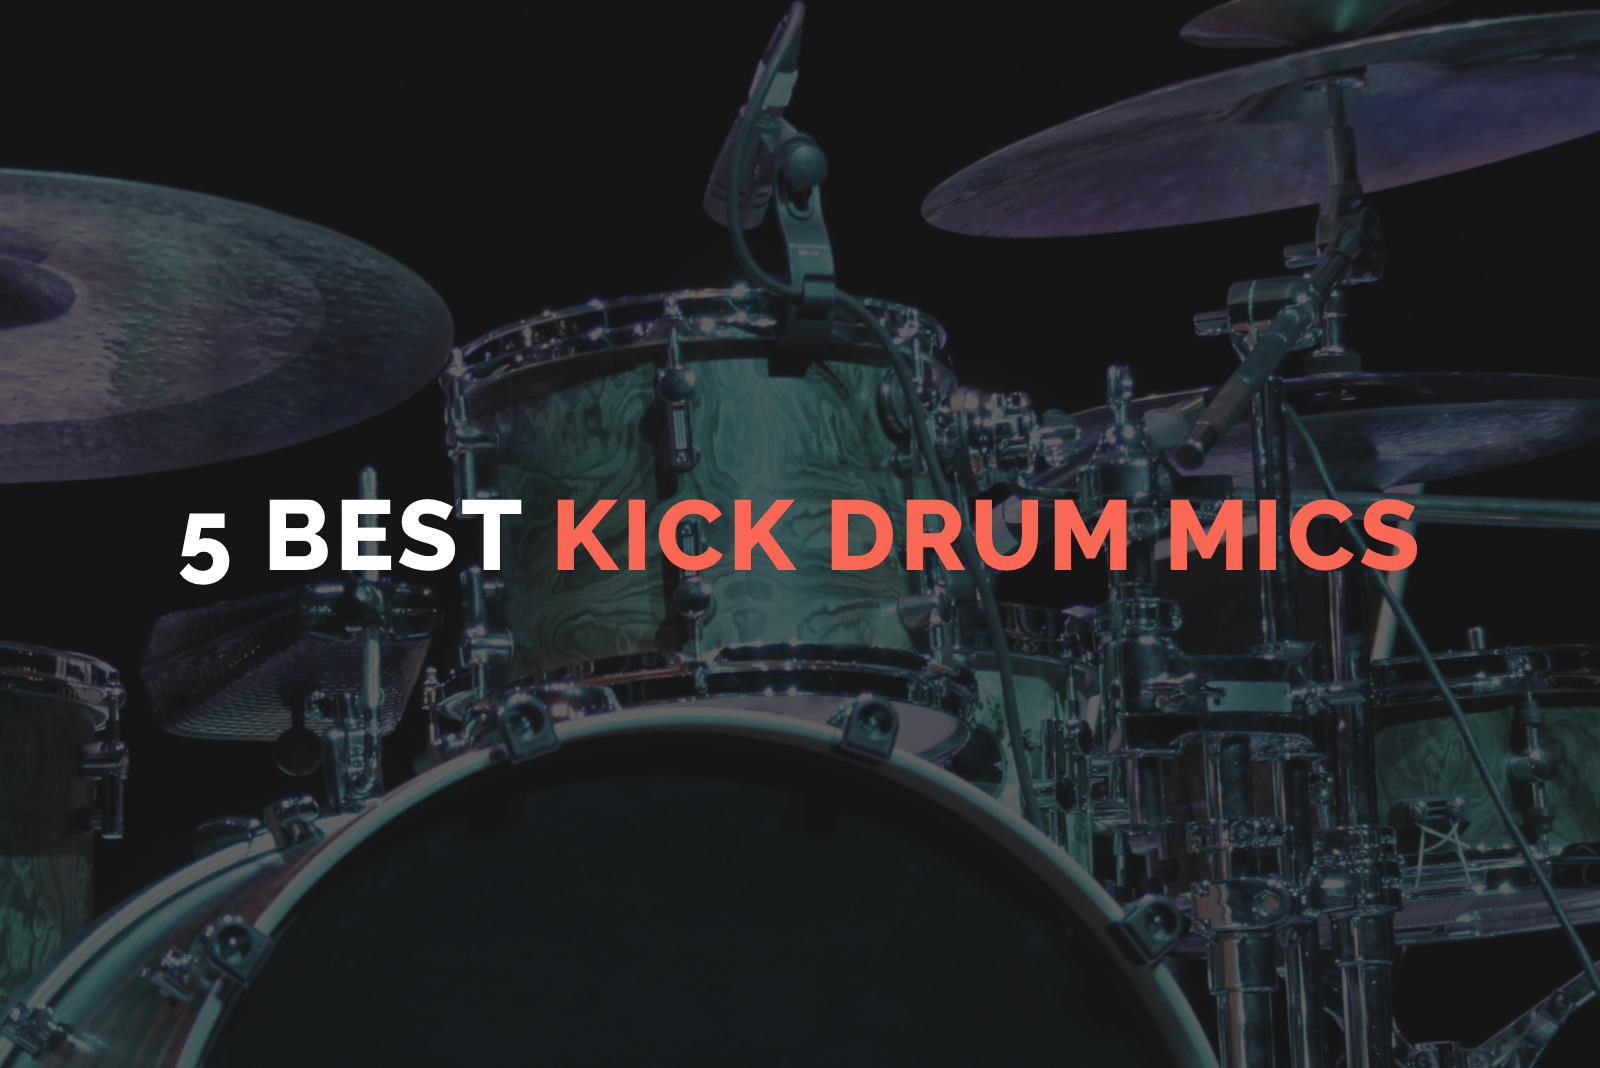 What You Need to Know AboutDrum Mics